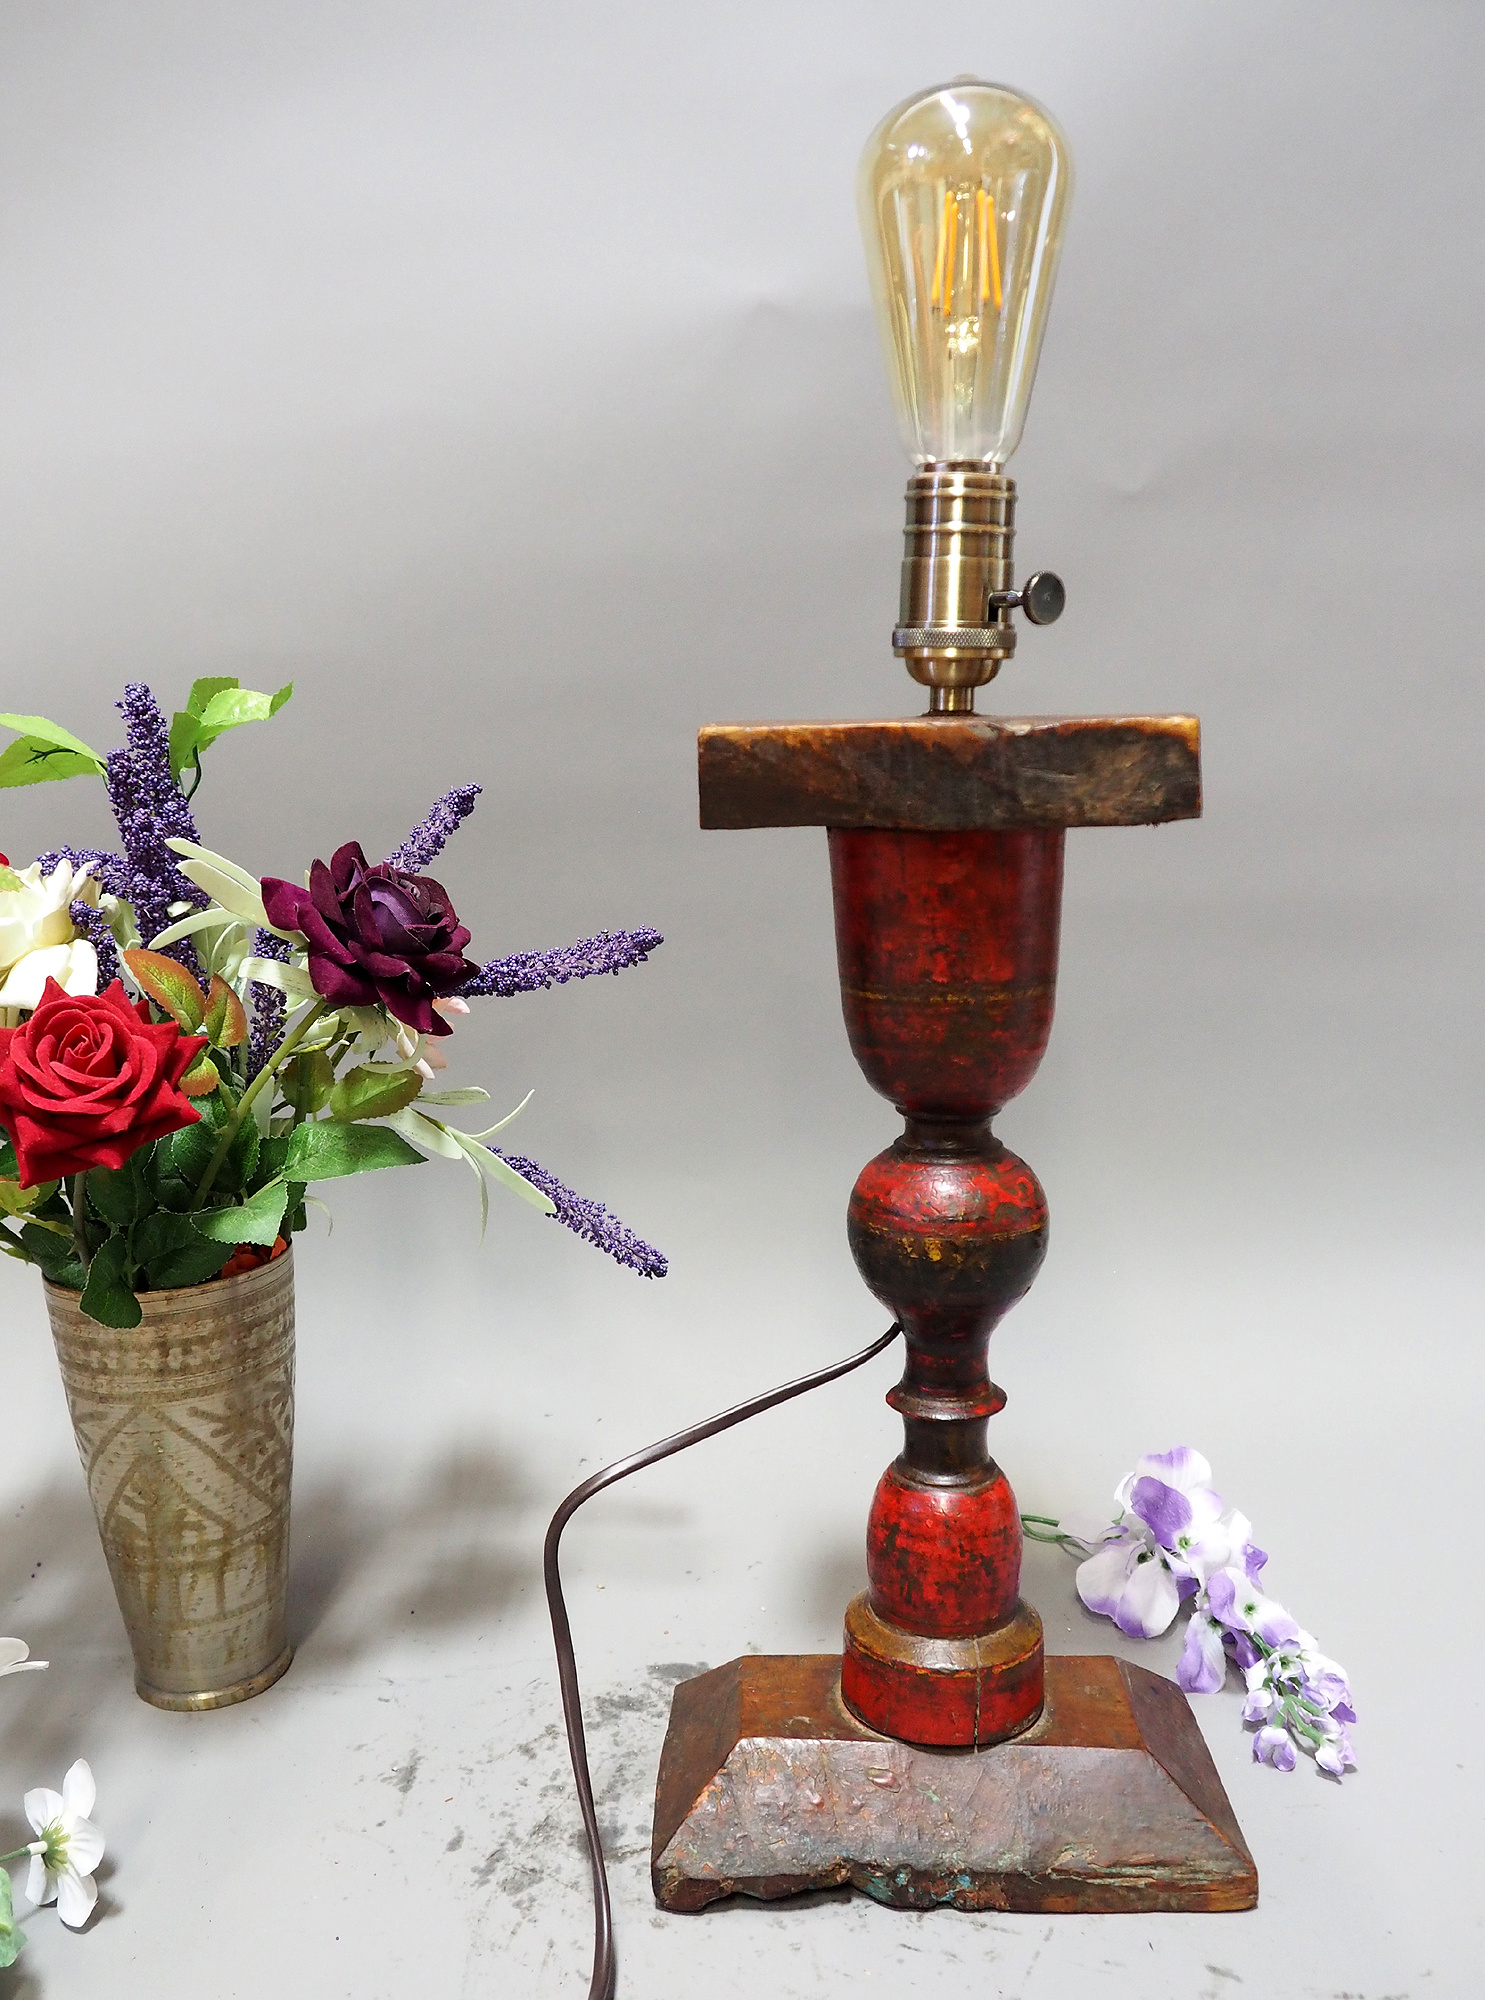 Antique handpainted stunning Vintage Lacquerware wooden Table Lamp with Vintage light fitting from Afghanistan / Pakistan No:21/8